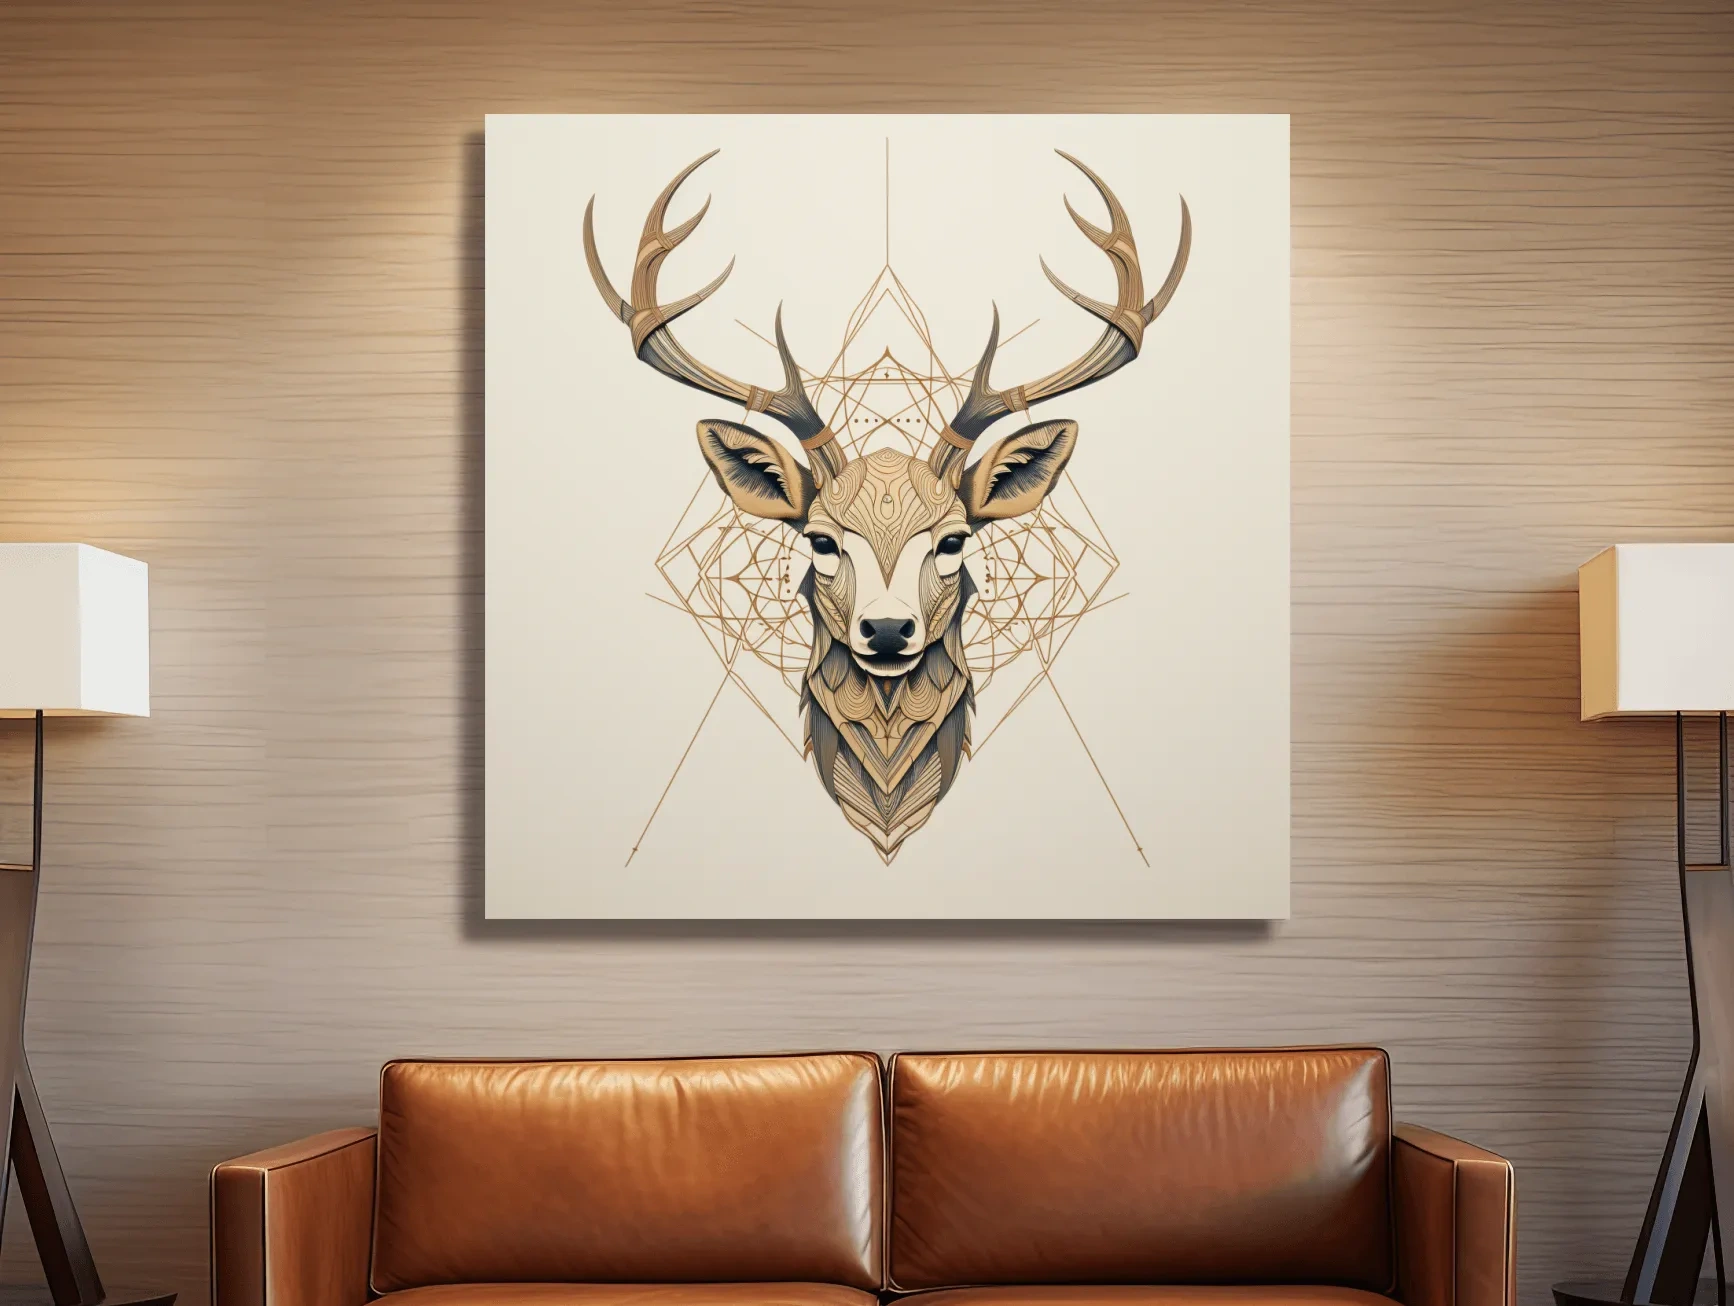 https://mountaincanvas.ca/sites/default/files/styles/mockup_square_12/public/2023-09/lindsay.wils_a_pattern_of_a_deer_head_on_a_beige_background_in__88e659a6-f357-4484-b418-abc7d6ccbadd.png.webp?itok=DumI1fkL